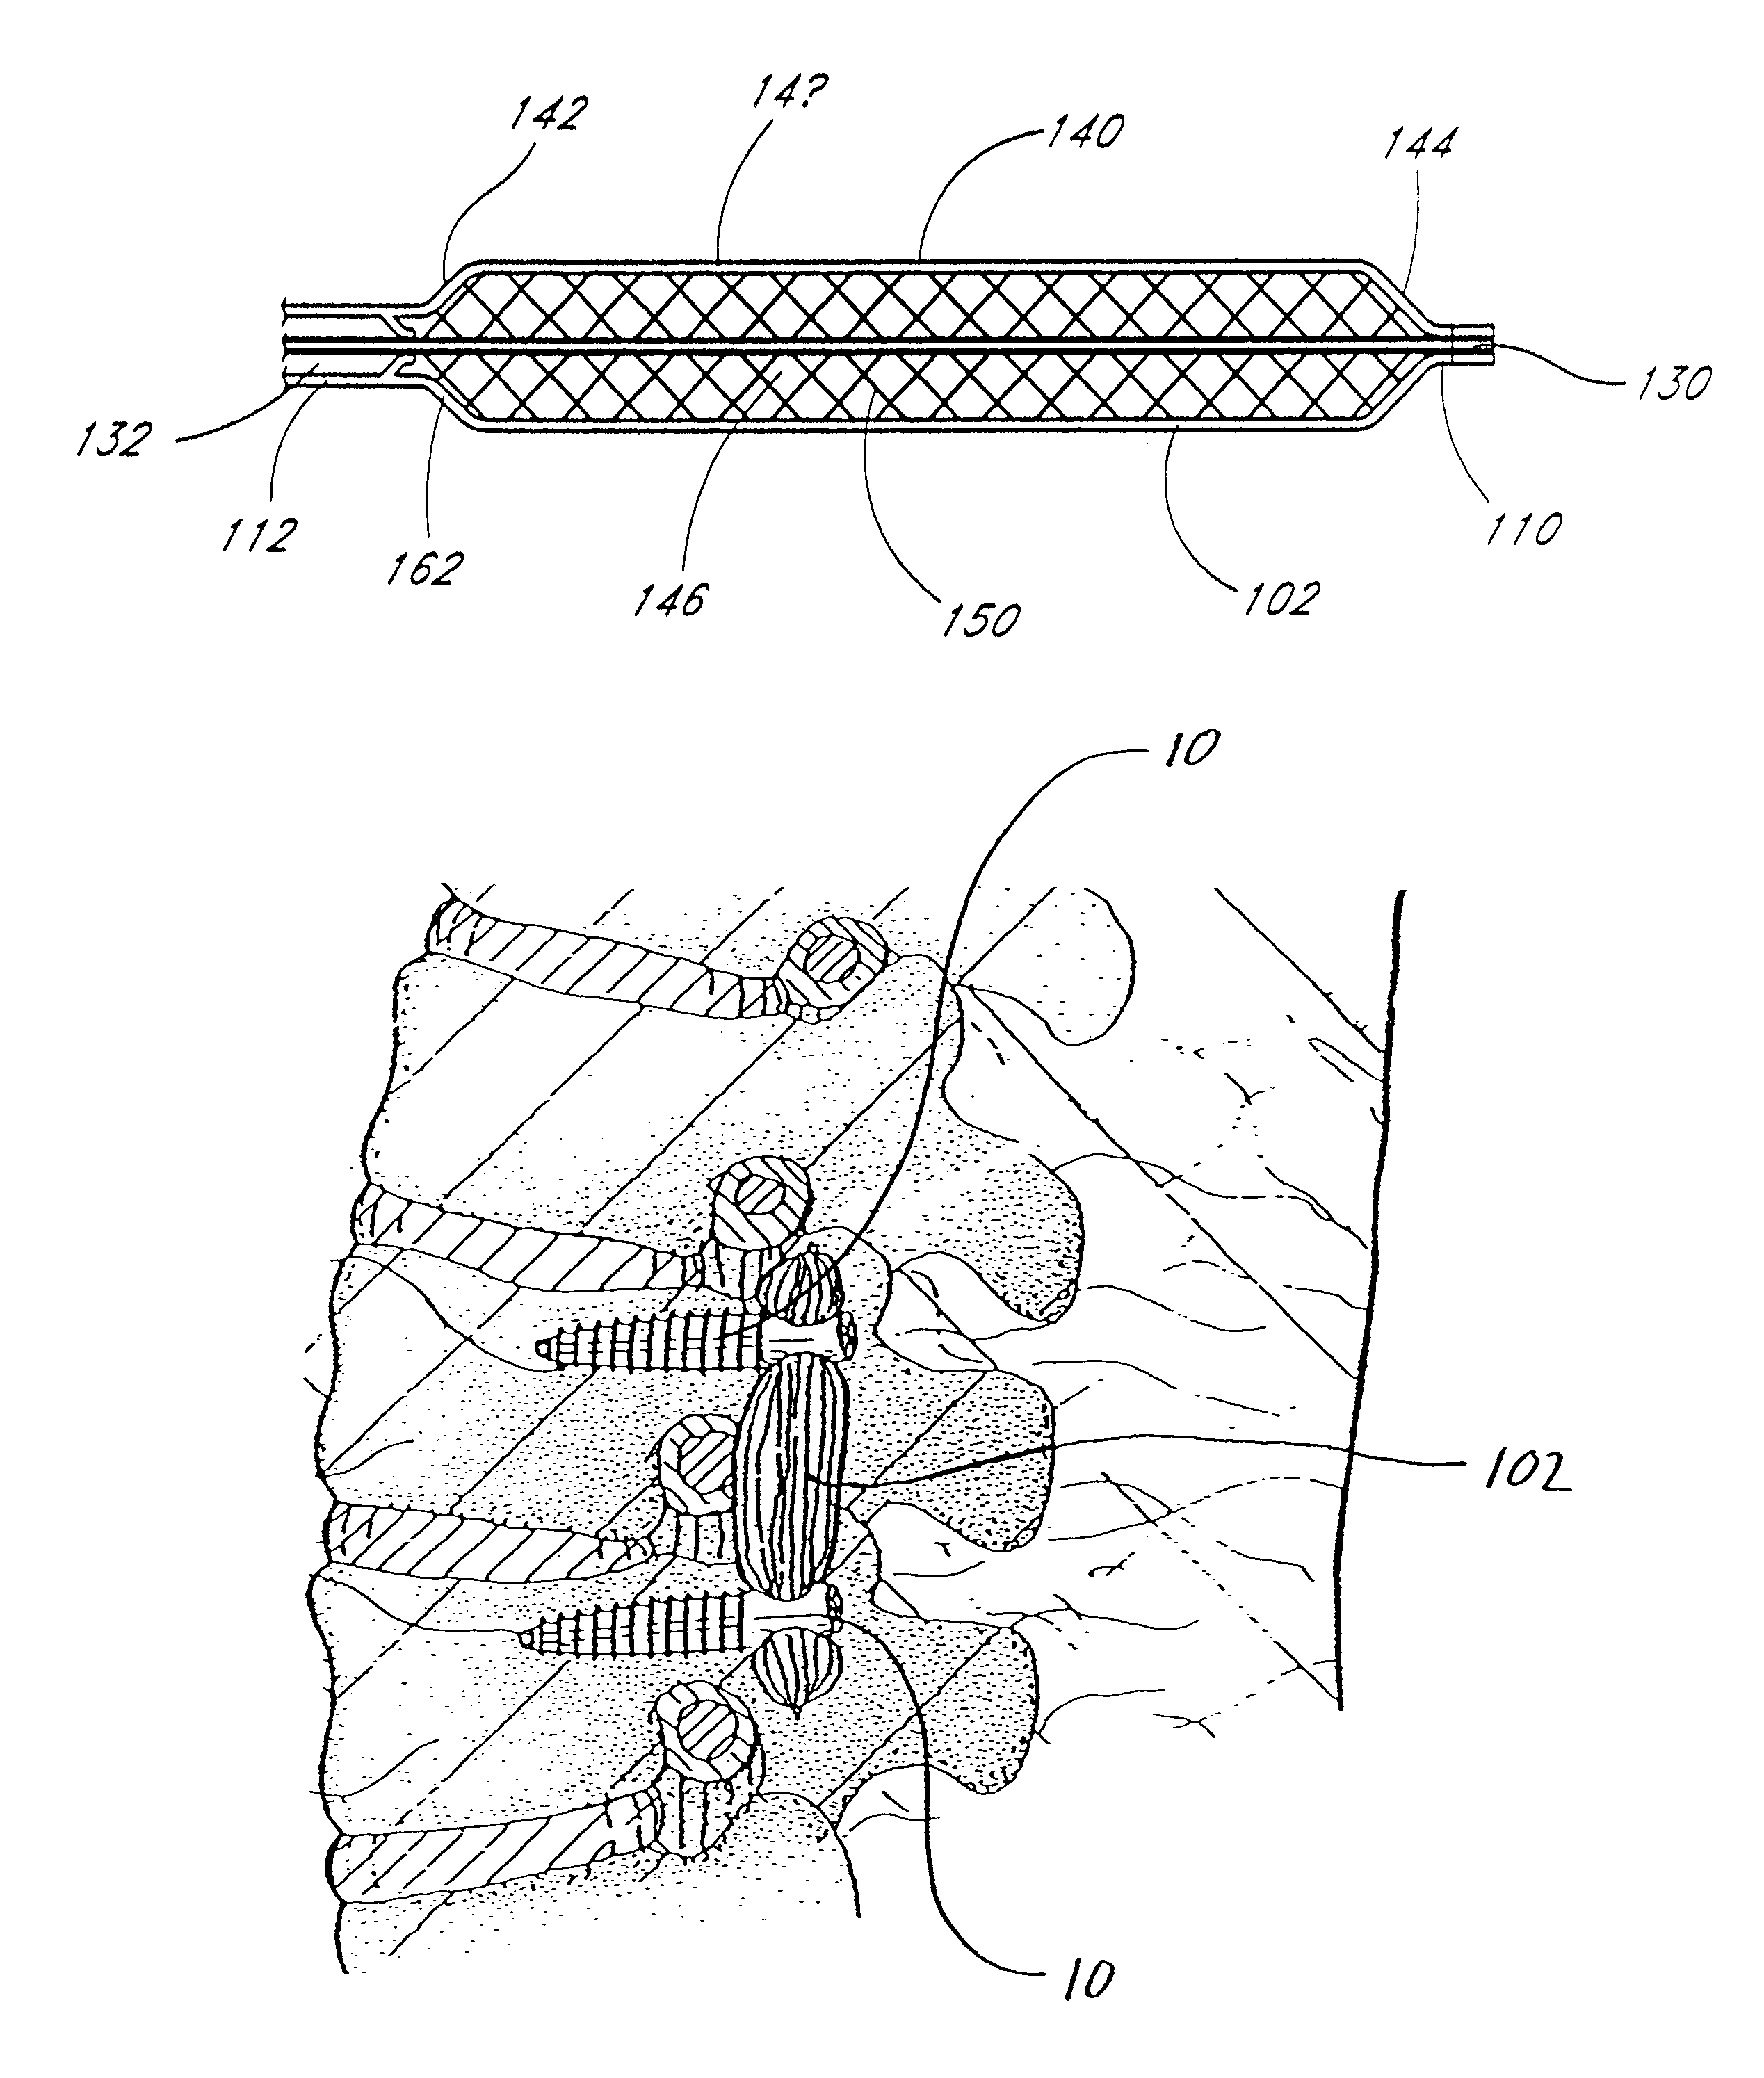 Formable orthopedic fixation system